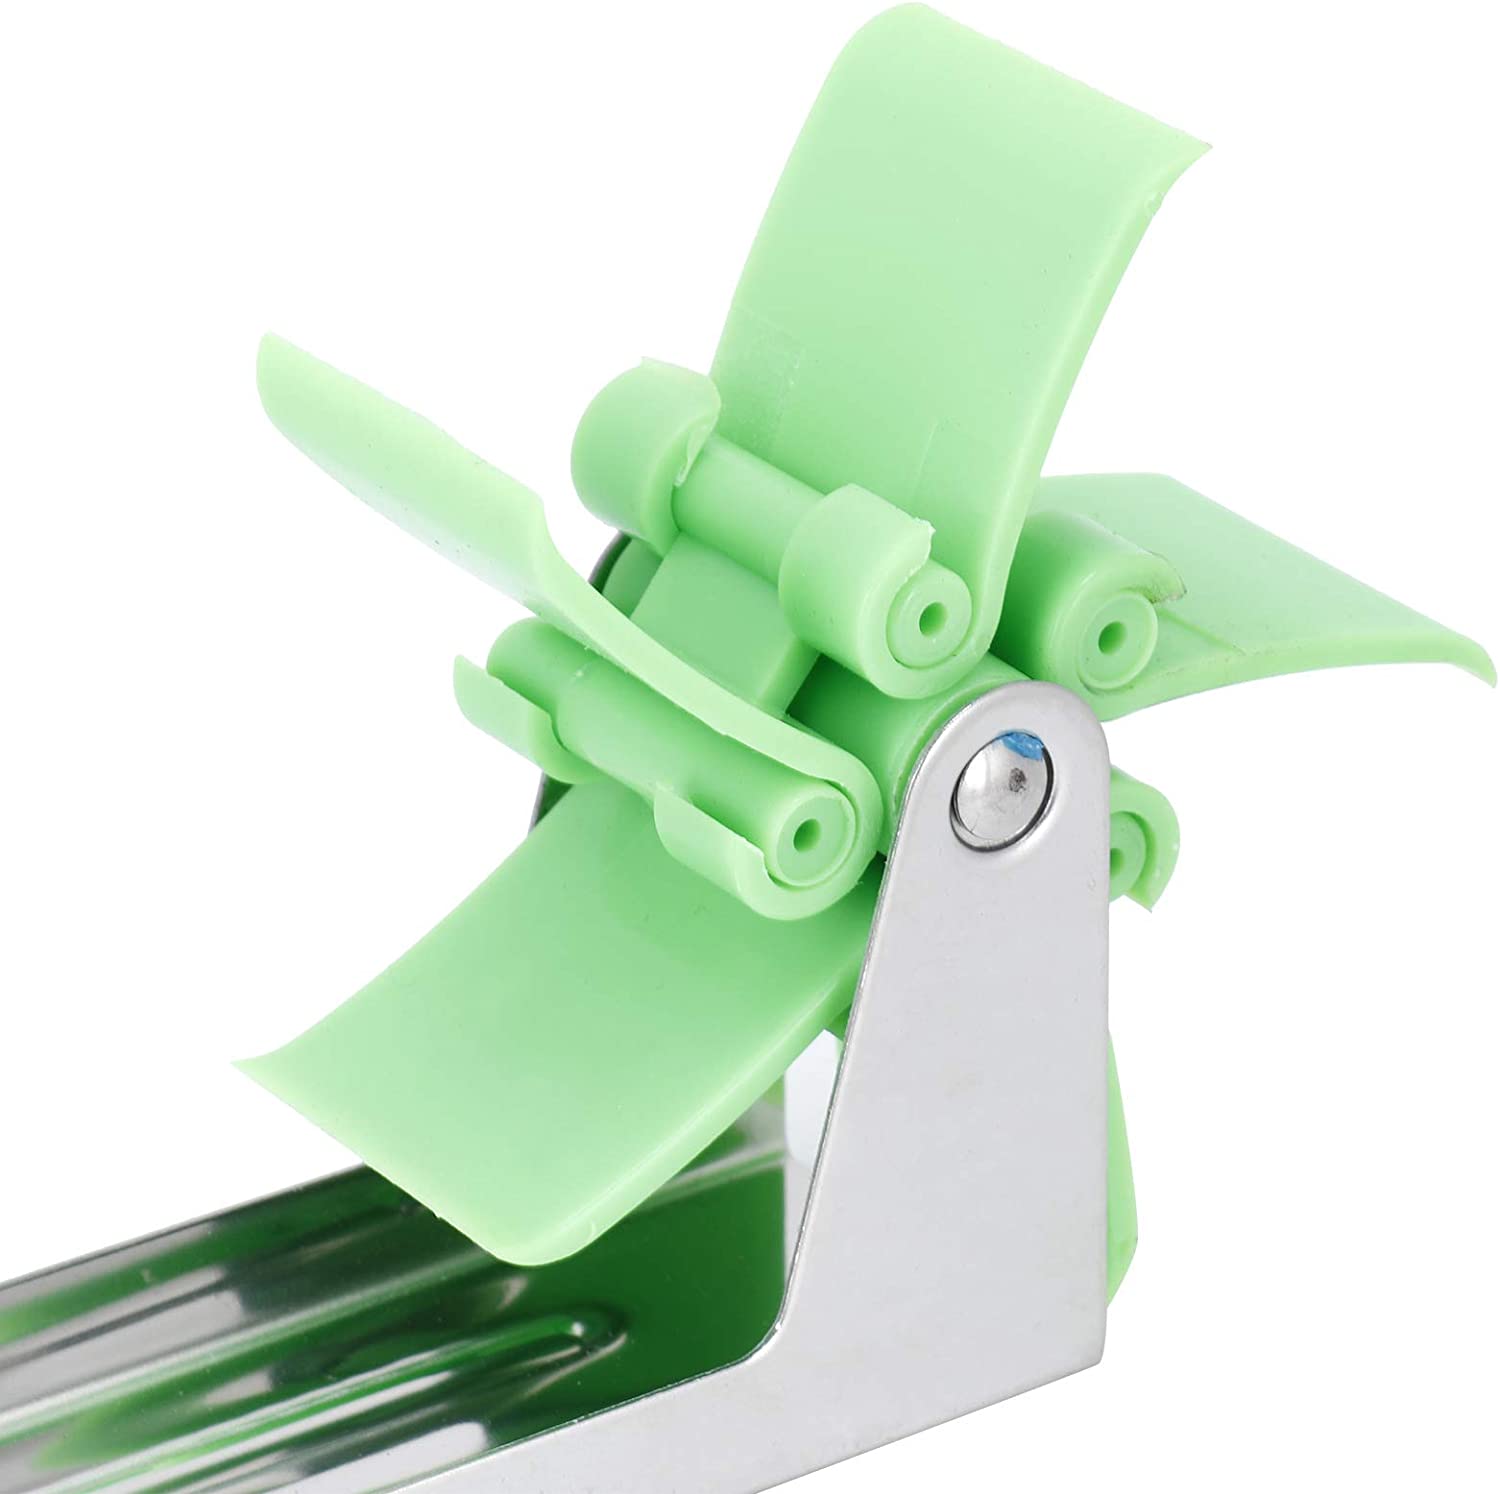 7160 Stainless Steel Washable Watermelon Cutter Windmill Slicer Cutter Peeler for Home/Smart Kitchen Tool Easy to Use DeoDap